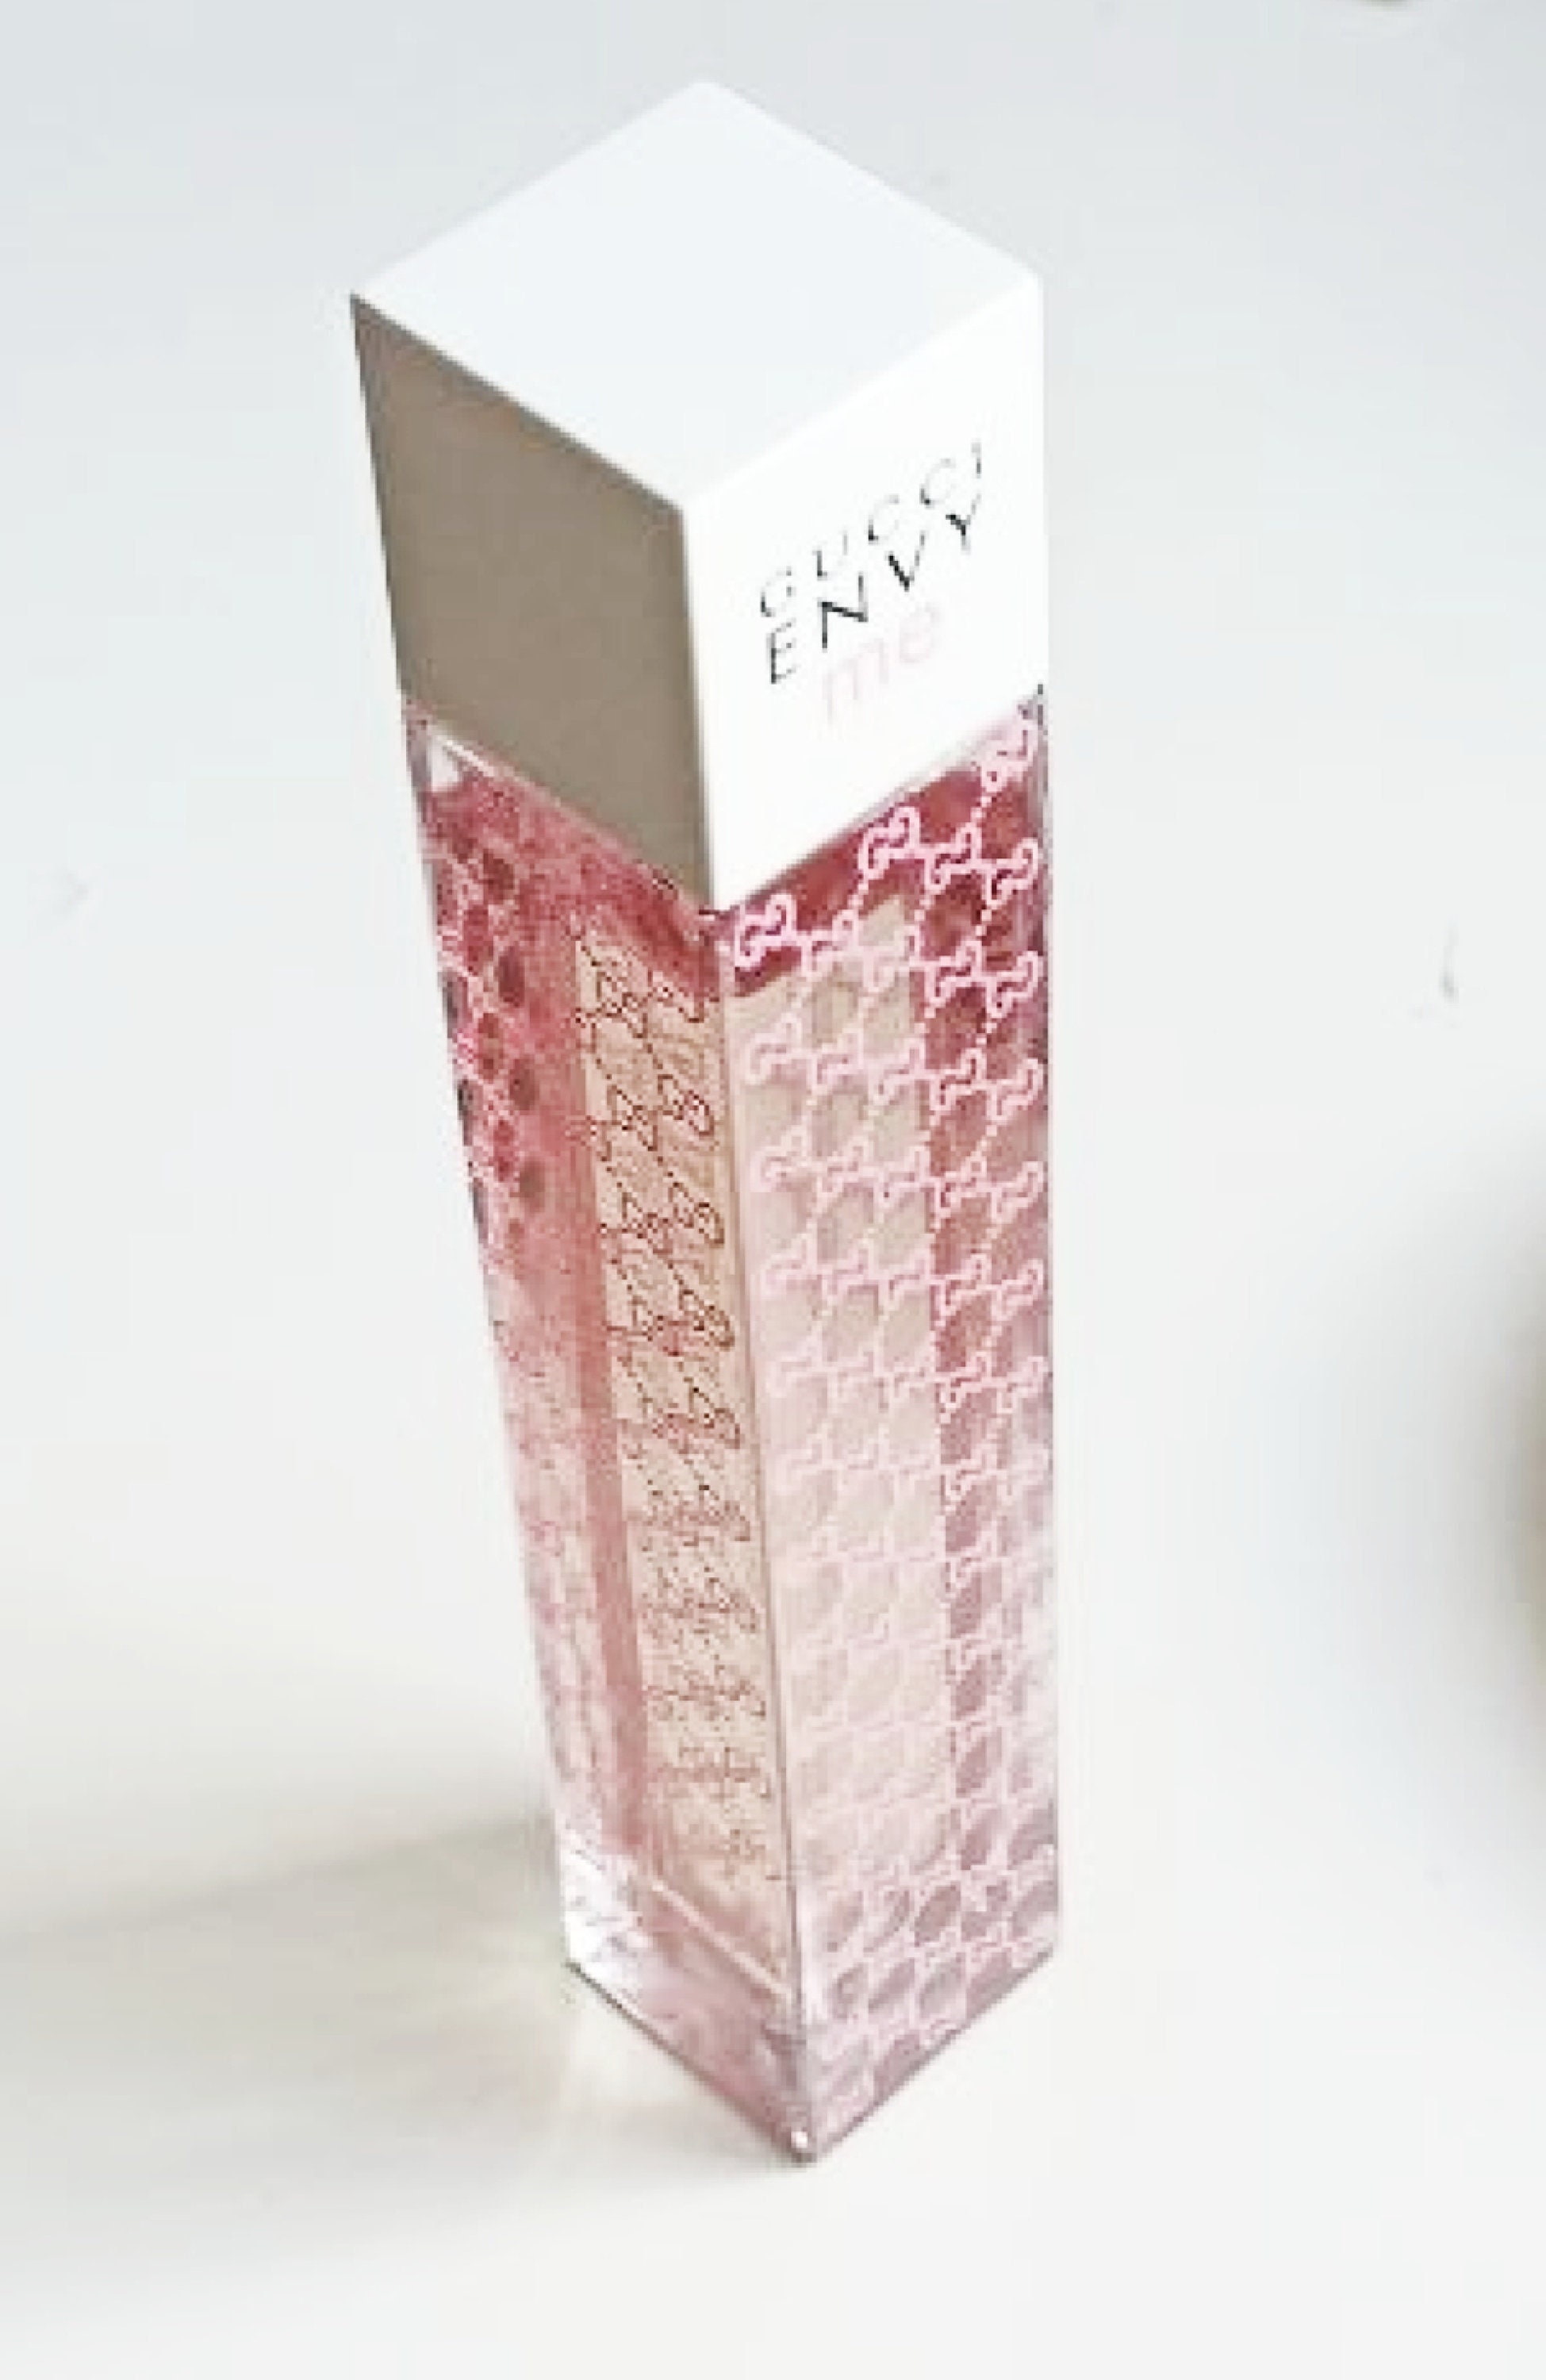 Gucci Envy Me Perfume Samples Perfume Decant Discontinued - Etsy